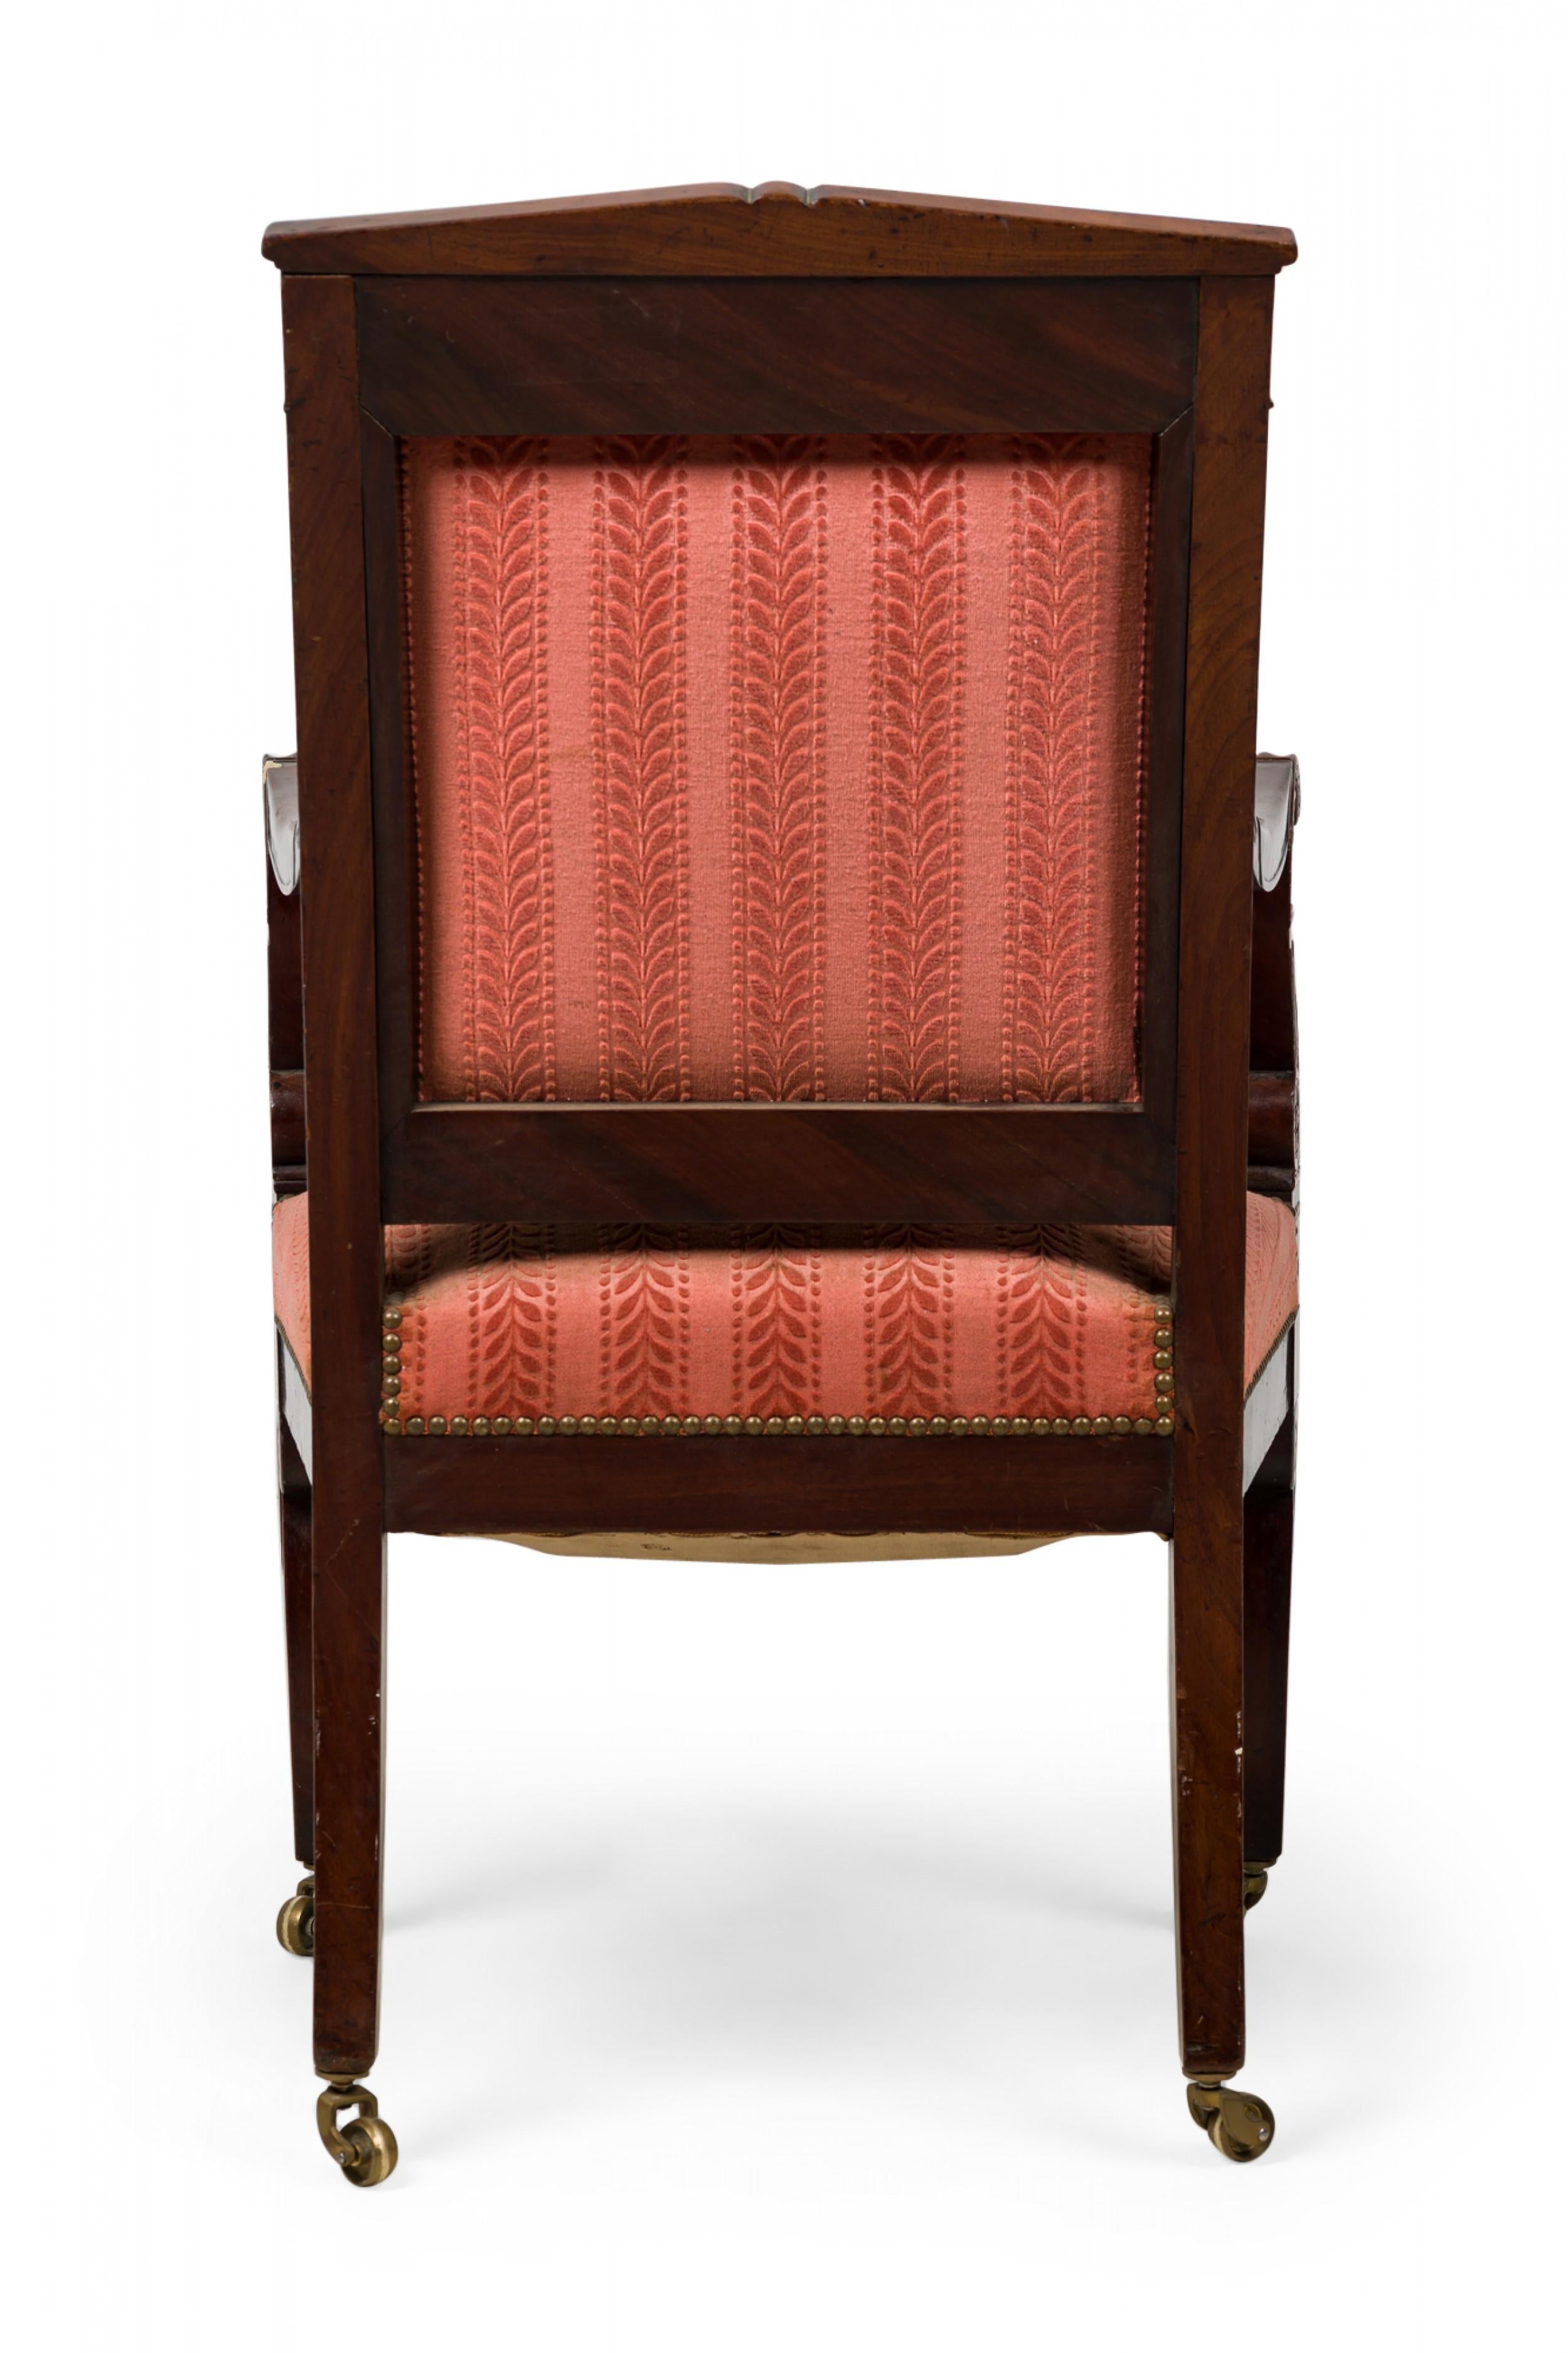 19th Century French Empire Armchair with Red Floral Striped Damask Upholstery For Sale